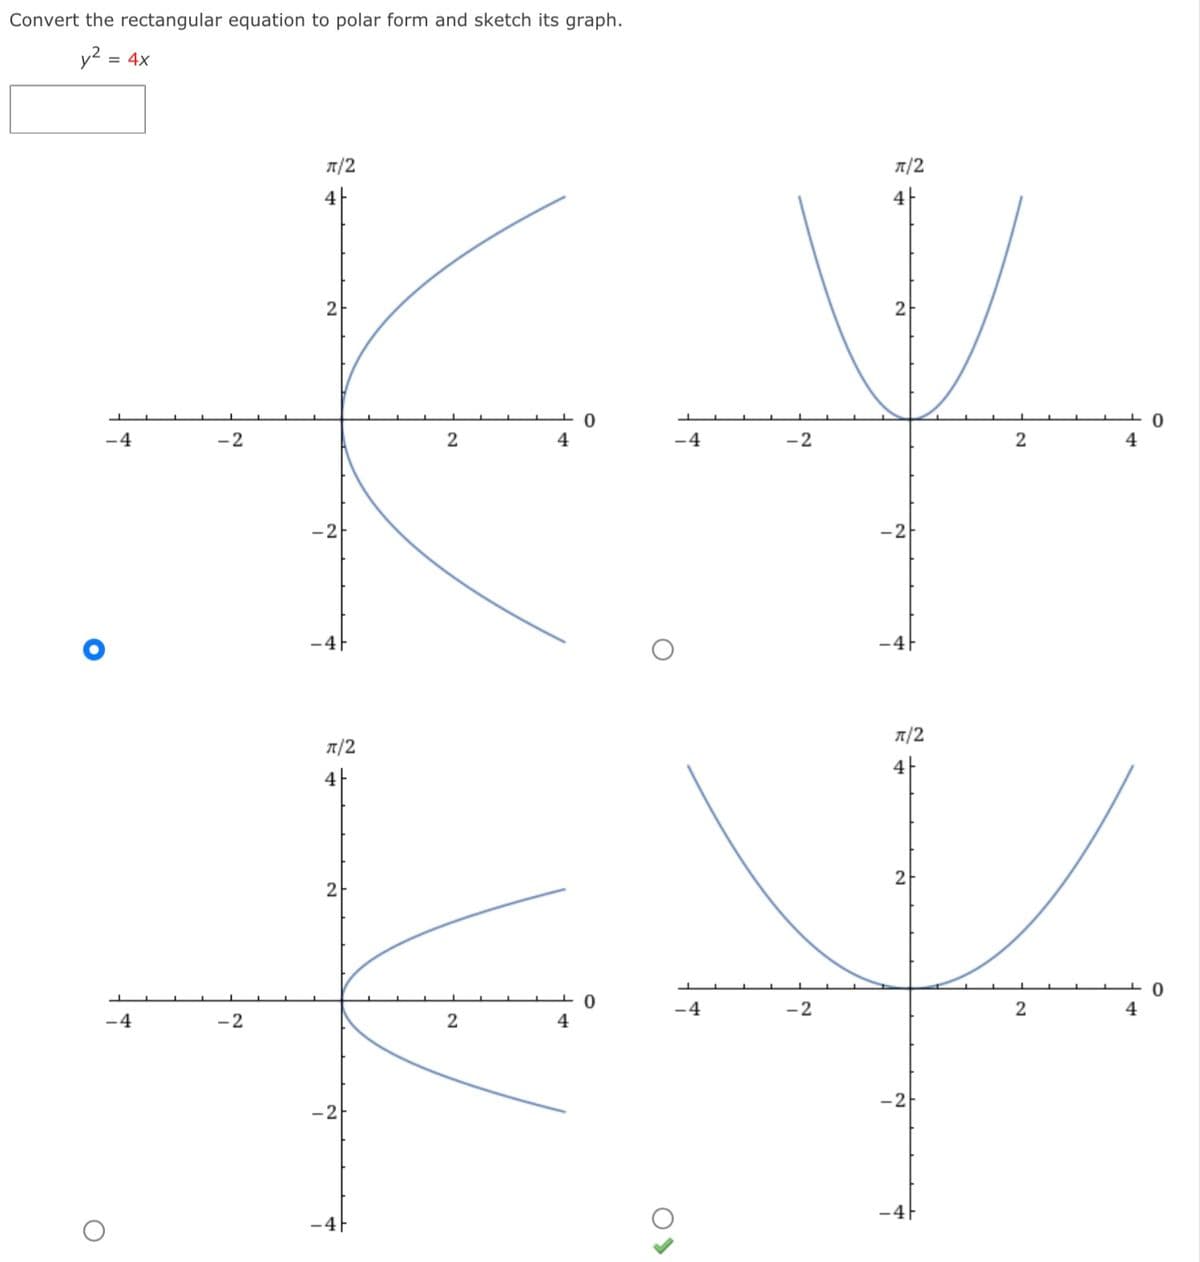 # Converting Rectangular Equation to Polar Form

## Problem Statement:
Convert the rectangular equation to polar form and sketch its graph.

## Equation Given:
\[ y^2 = 4x \]

### Graphs of Possible Polar Representations:

#### Graph Descriptions:
1. **Graph (Top Left)**:
   - This graph depicts a curve opening to the right. The curve passes through the point \( (0,0) \) and extends to positive x-values.

2. **Graph (Top Right)**:
   - This graph shows a parabolic curve opening upwards. The vertex of the parabola is at the origin \( (0,0) \), and it extends in both positive and negative directions along the x-axis.

3. **Graph (Bottom Left)**:
   - This graph presents a curve opening to the left. The curve passes through the origin \( (0,0) \) and expands to negative x-values.

4. **Graph (Bottom Right)**:
   - This graph illustrates another parabolic curve opening upwards, similar to the top right graph. The curve passes through the origin \( (0,0) \).

### Explanation of Correct Graph:
To identify which graph corresponds to the equation \( y^2 = 4x \) after converting to polar coordinates:

1. The standard form for a parabola opening to the right is \( y^2 = 4ax \), indicating that it would exhibit symmetry along the y-axis and open towards the positive x-direction.
2. The transformation into polar coordinates does not break this symmetry.

Therefore, the correct graph for the given equation is the **Top Left Graph**.

### Answer Key:
- The blue circle (o) next to the top left graph indicates this graph is the correct portrayal for the given equation.